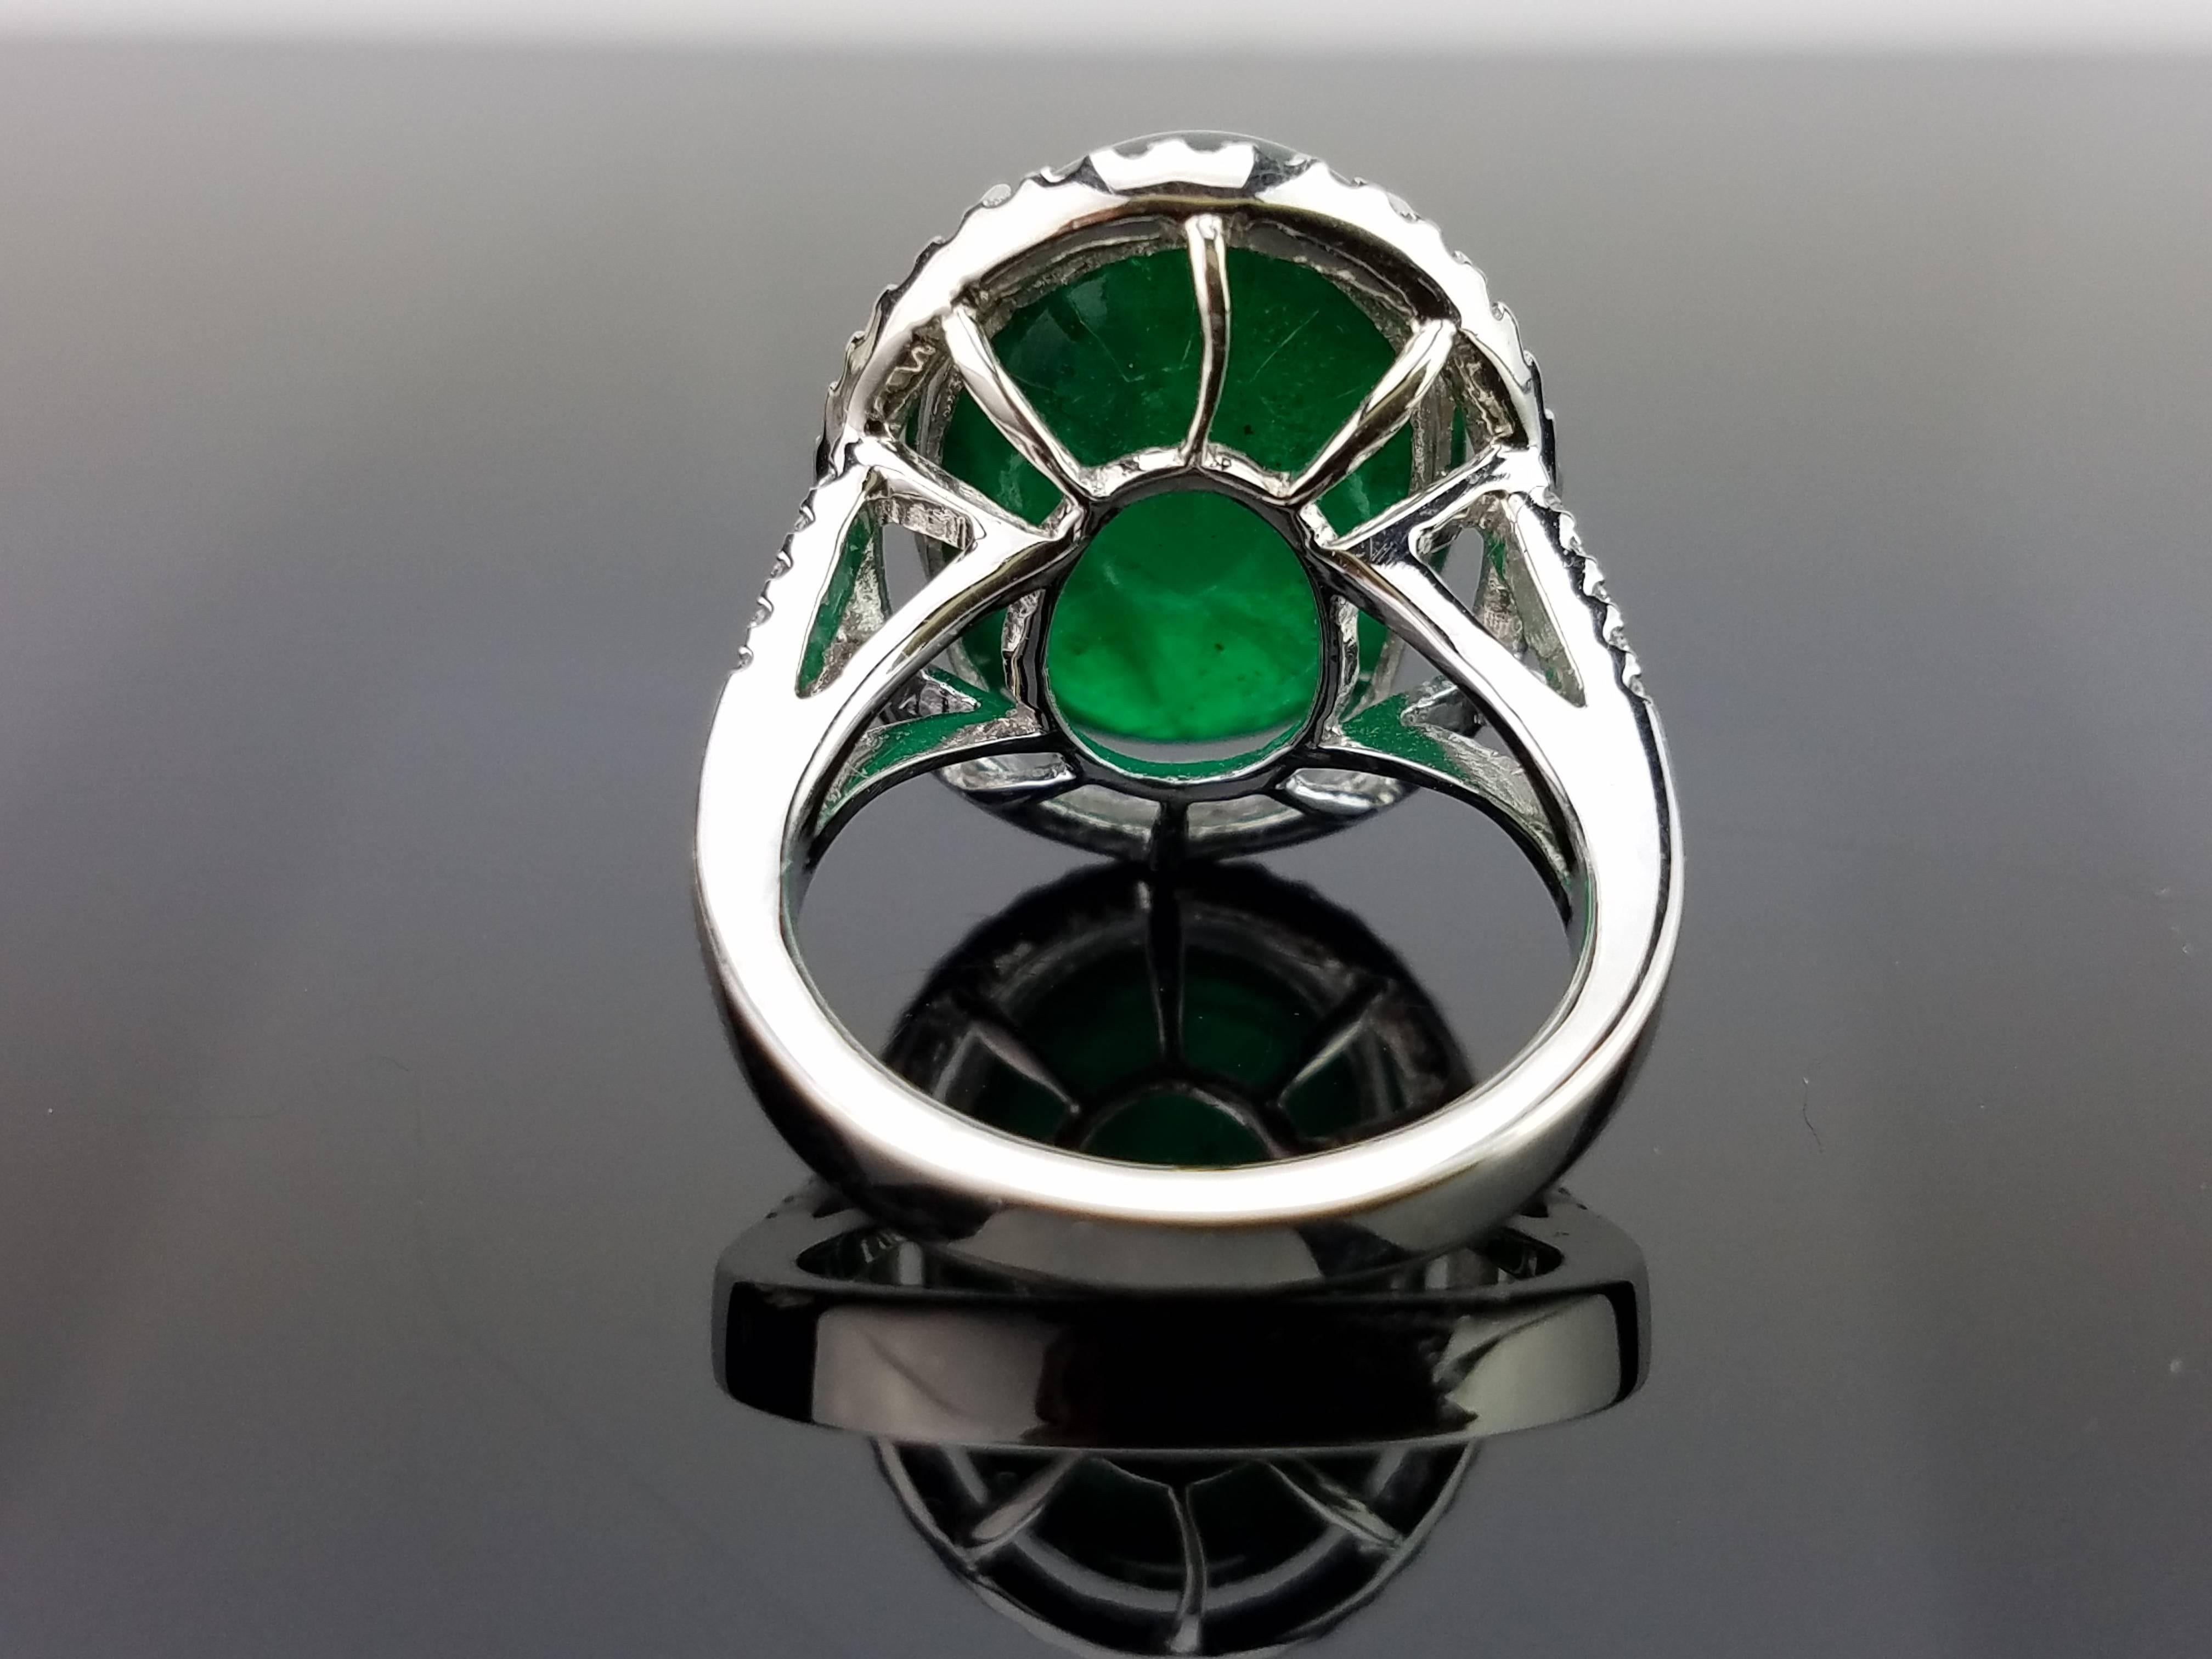 Oval Cut 17.35 Carat Emerald Cabochon and Diamond Cocktail Ring